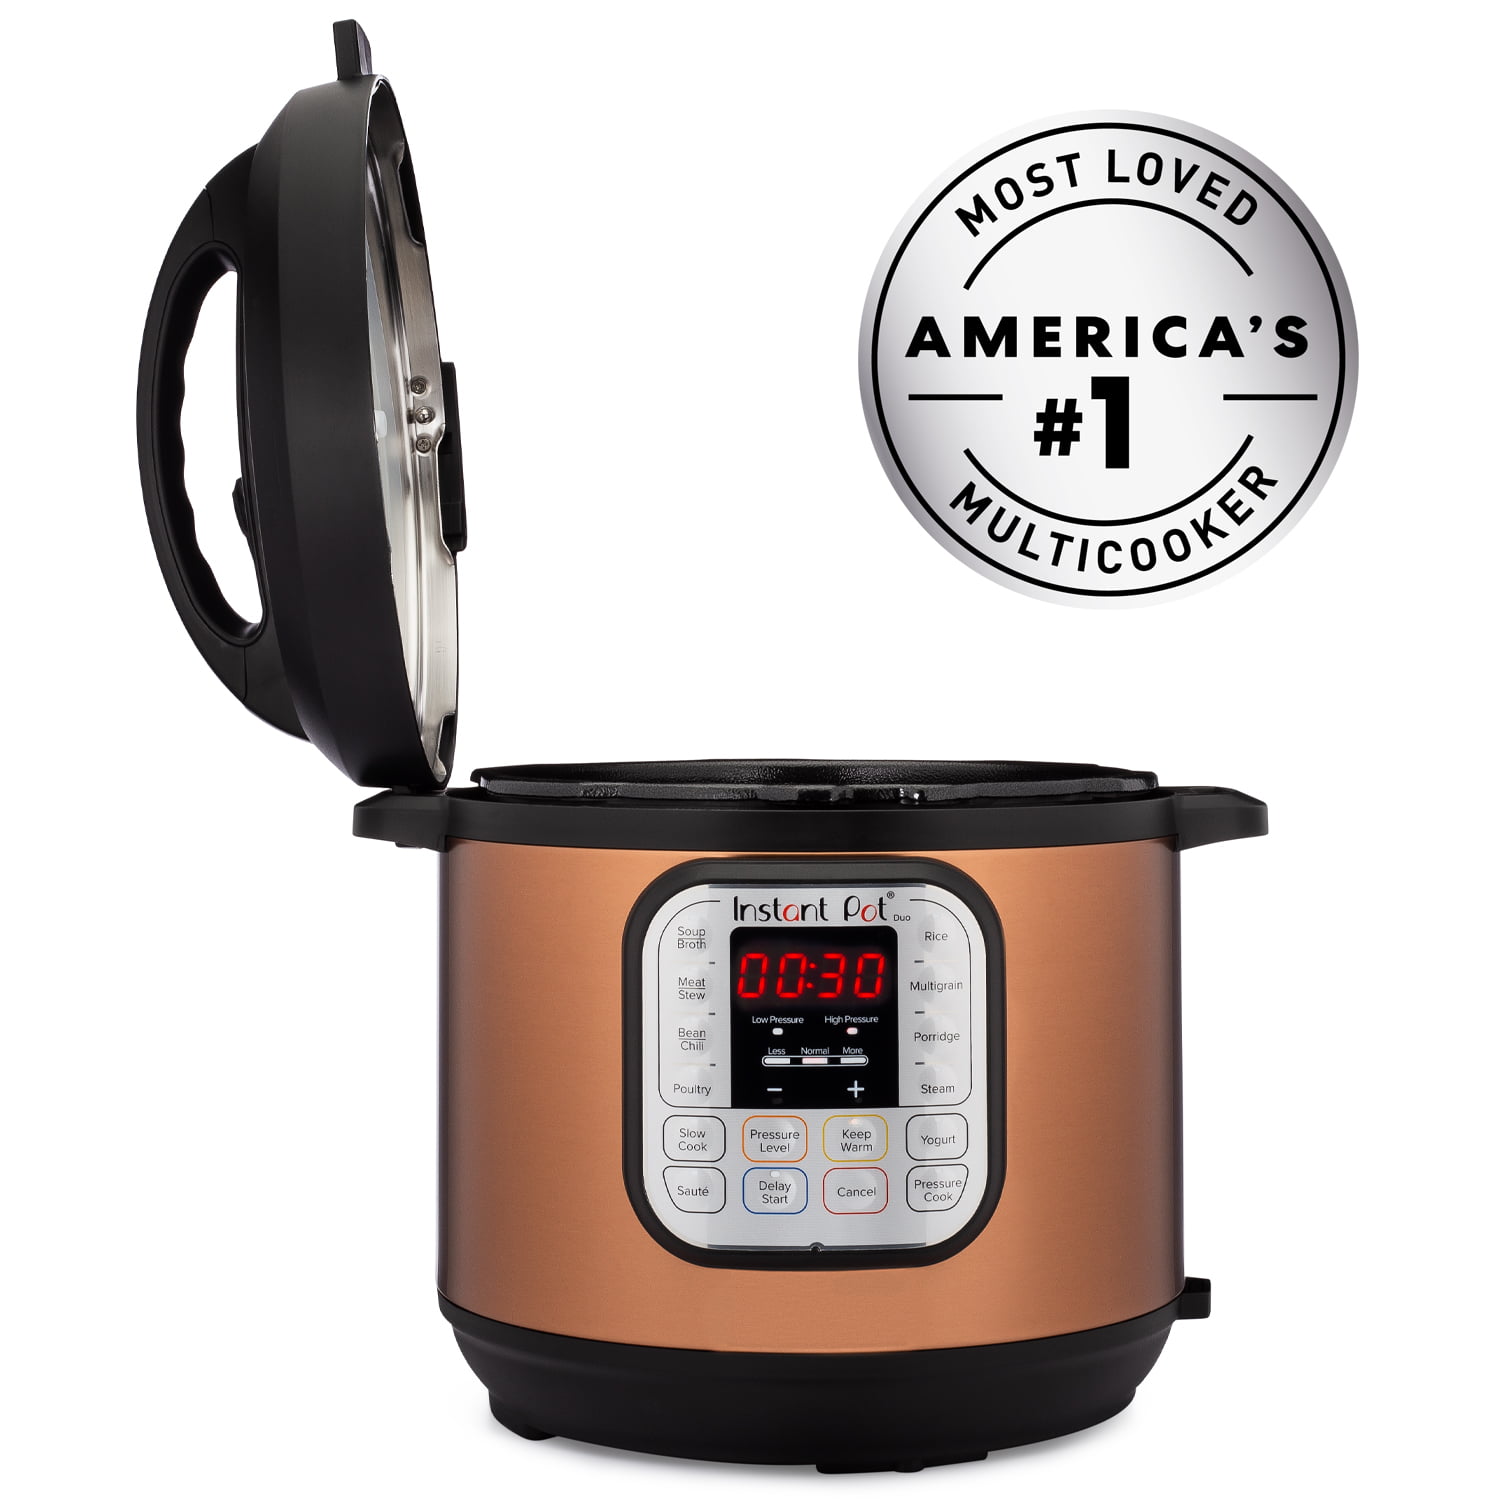 Accessories for your Instant Pots and Pressure Cookers - THE SUGAR FREE  DIVA Sugar Free Sunday Spotlight